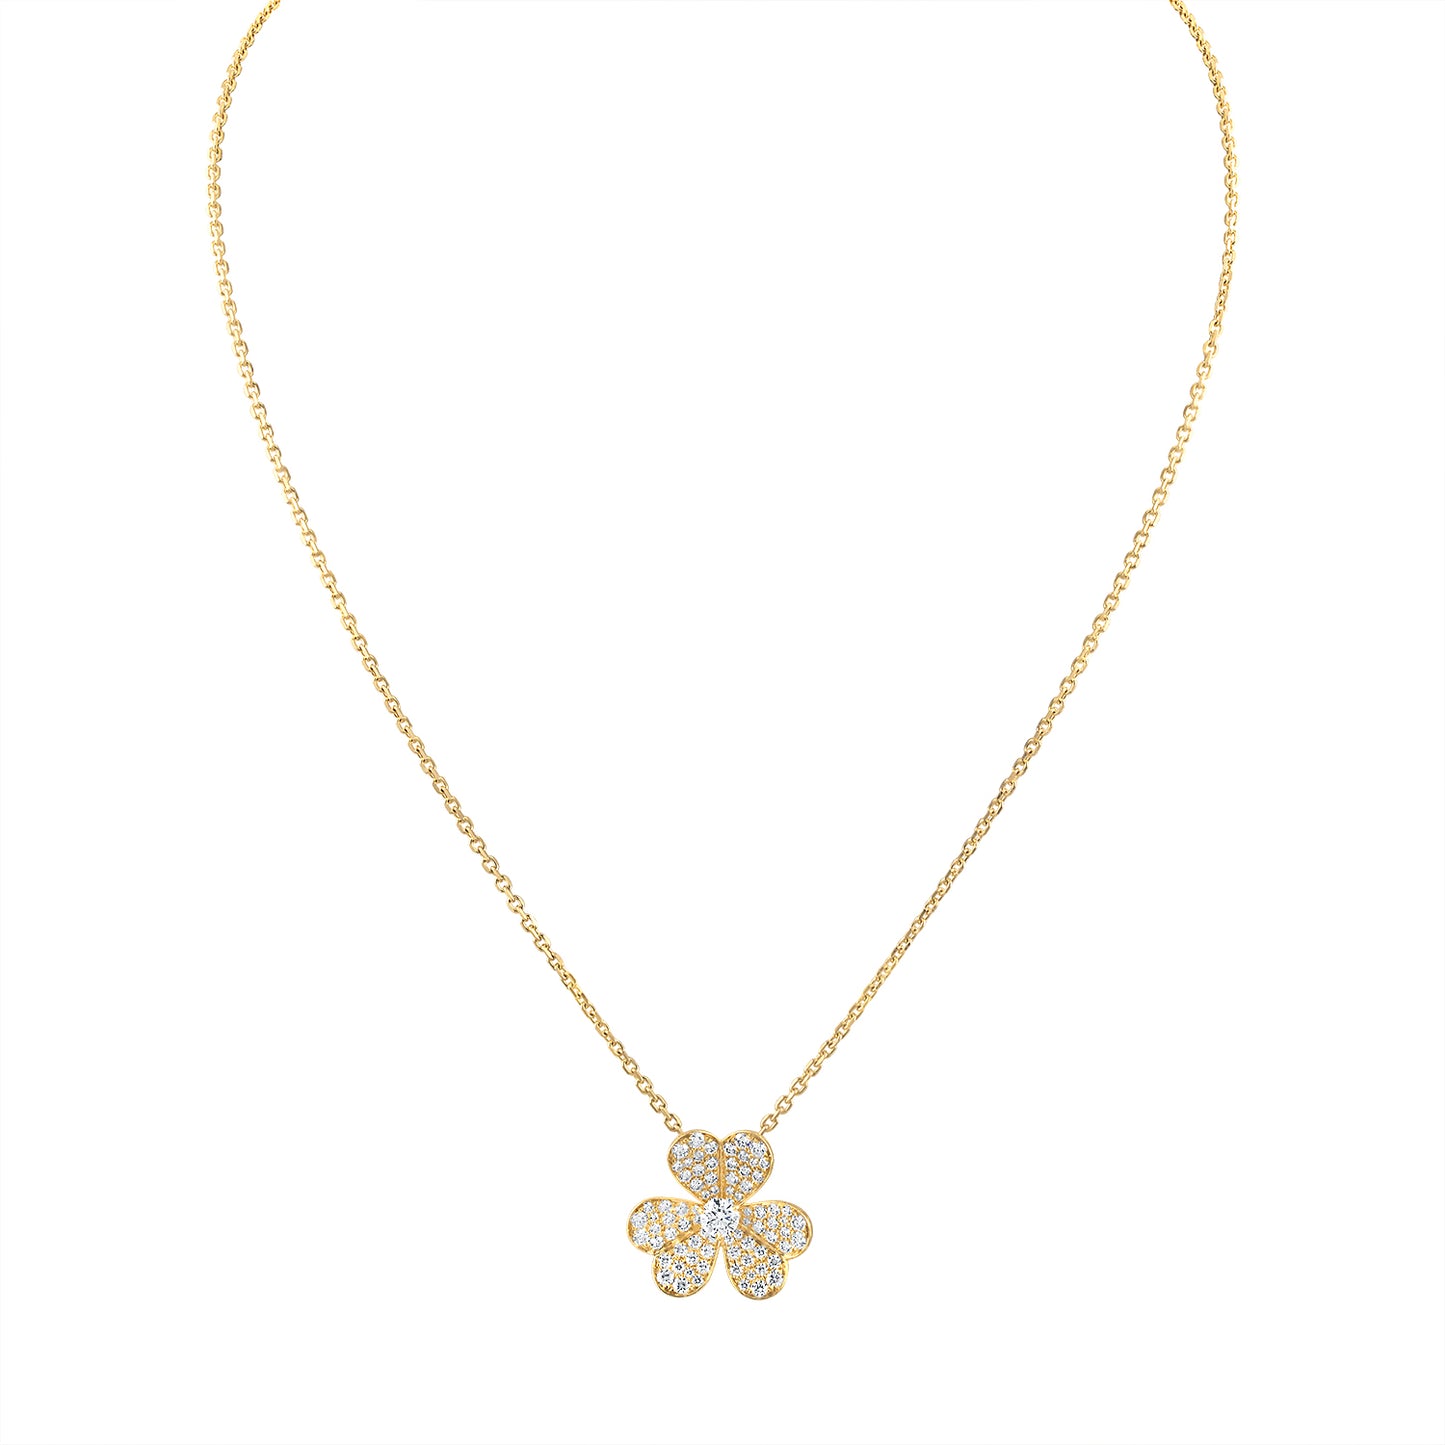 Floral Diamond Necklace in 18K Yellow Gold